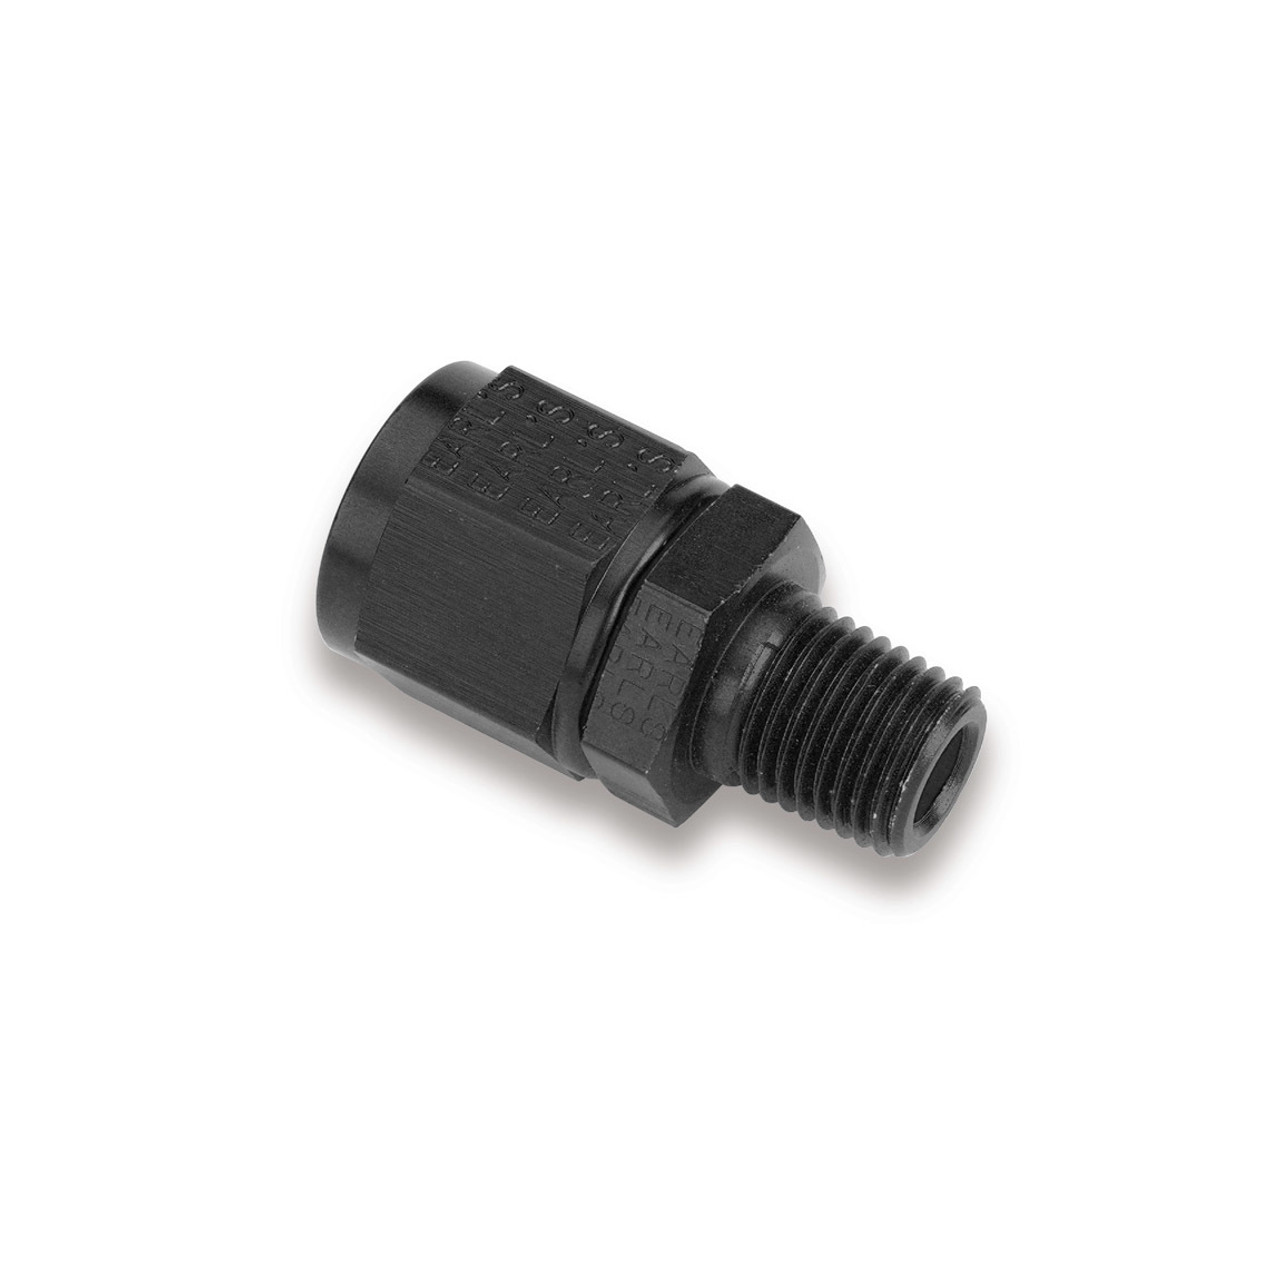 Adapter Fitting 6an Fem Swivel to Male 1/8 NPT